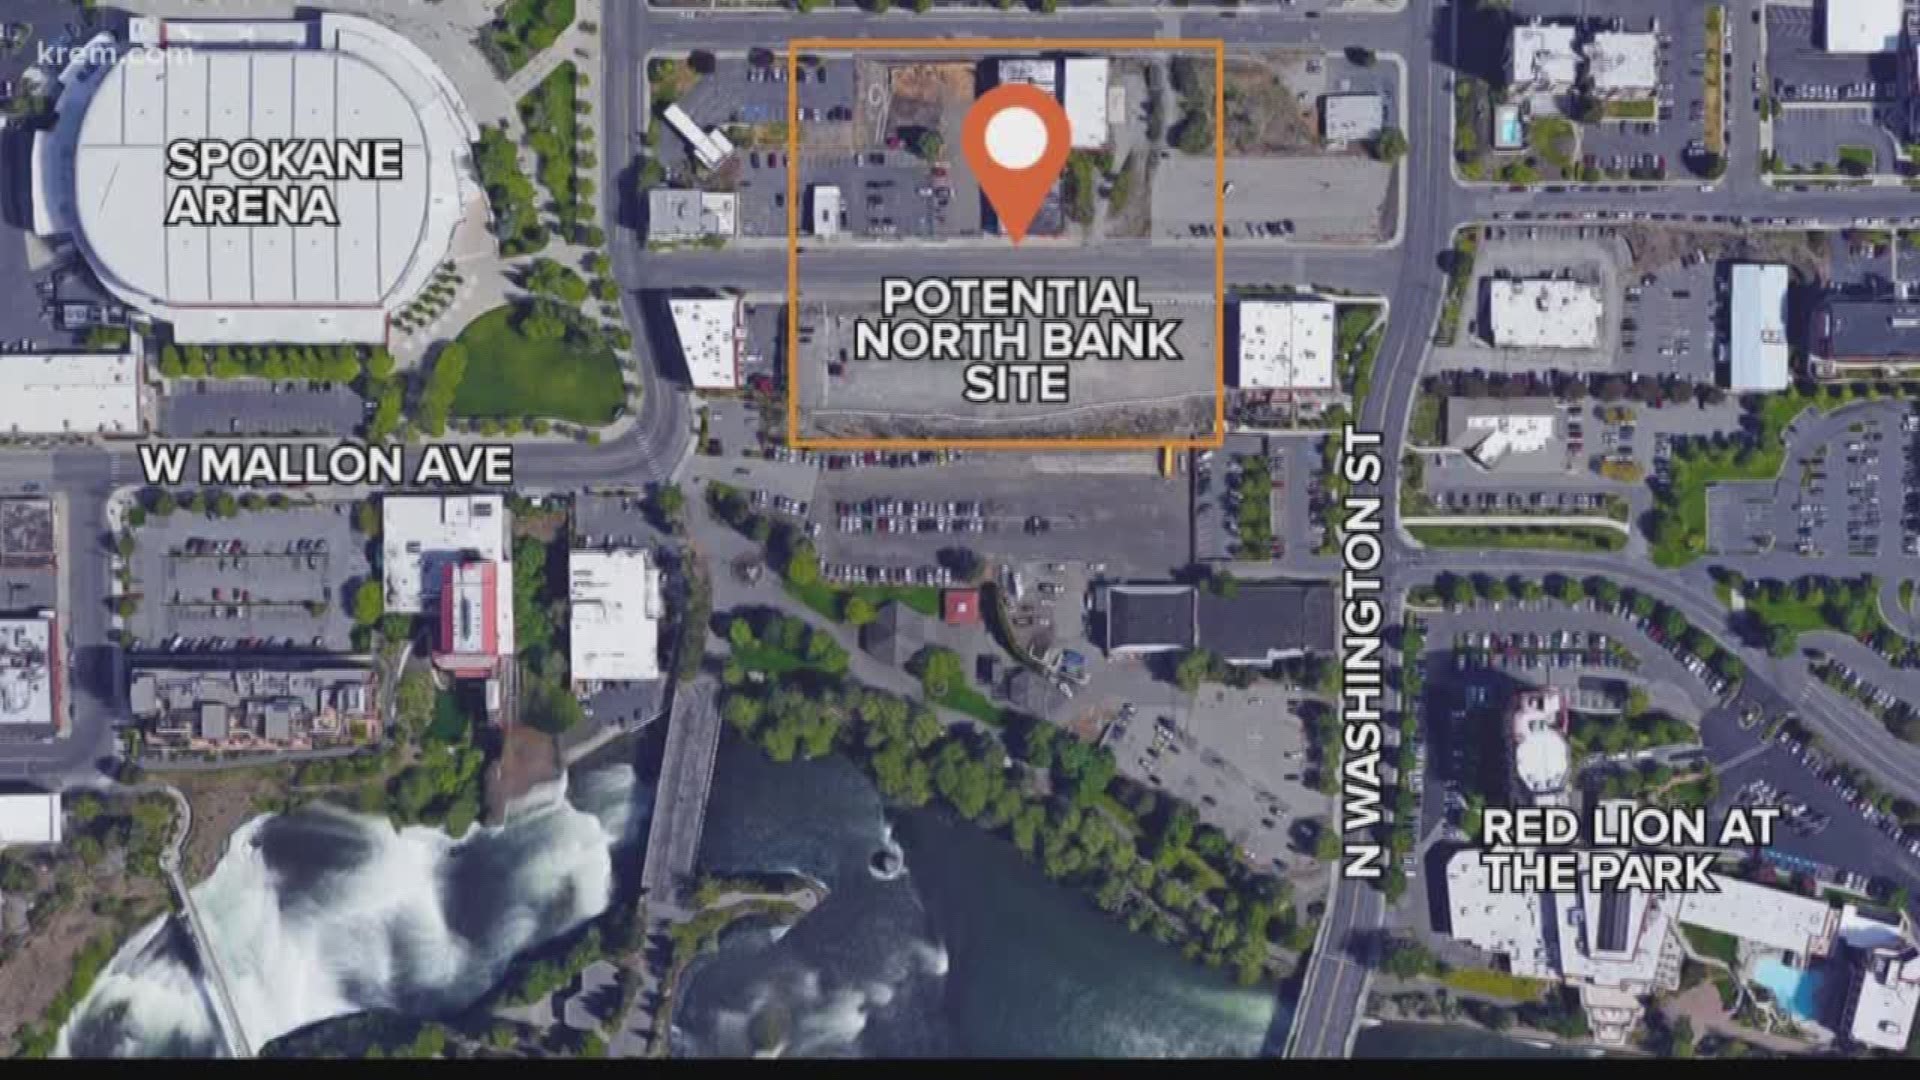 The land next to the Spokane Arena could become Spokane's biggest sports hub.